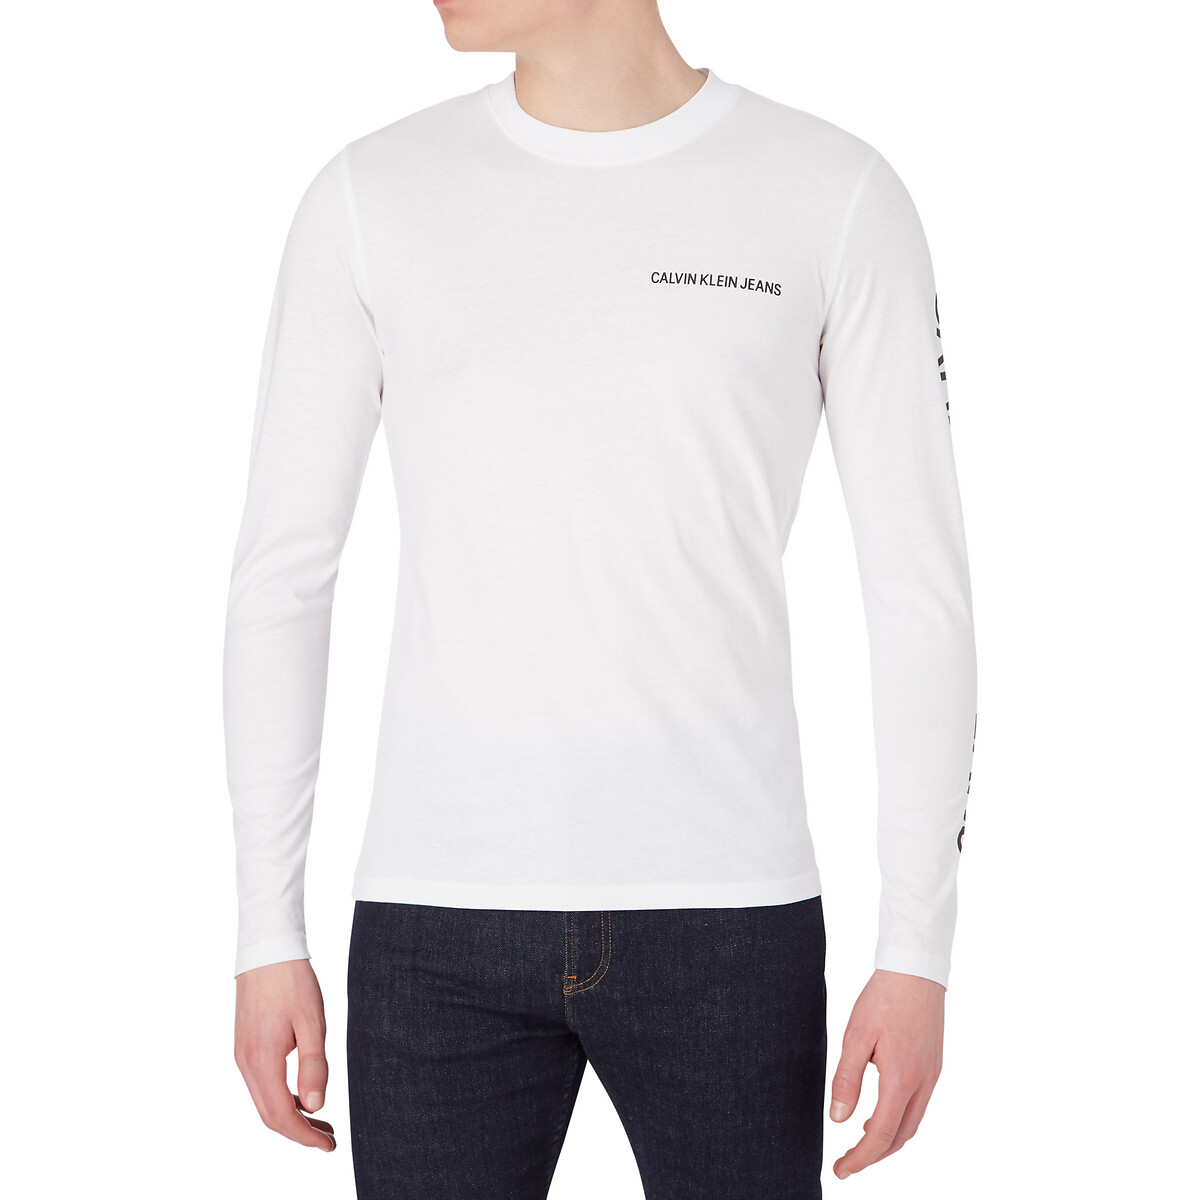 Essential organic cotton t-shirt with long sleeves , white, Calvin Klein Jeans | La